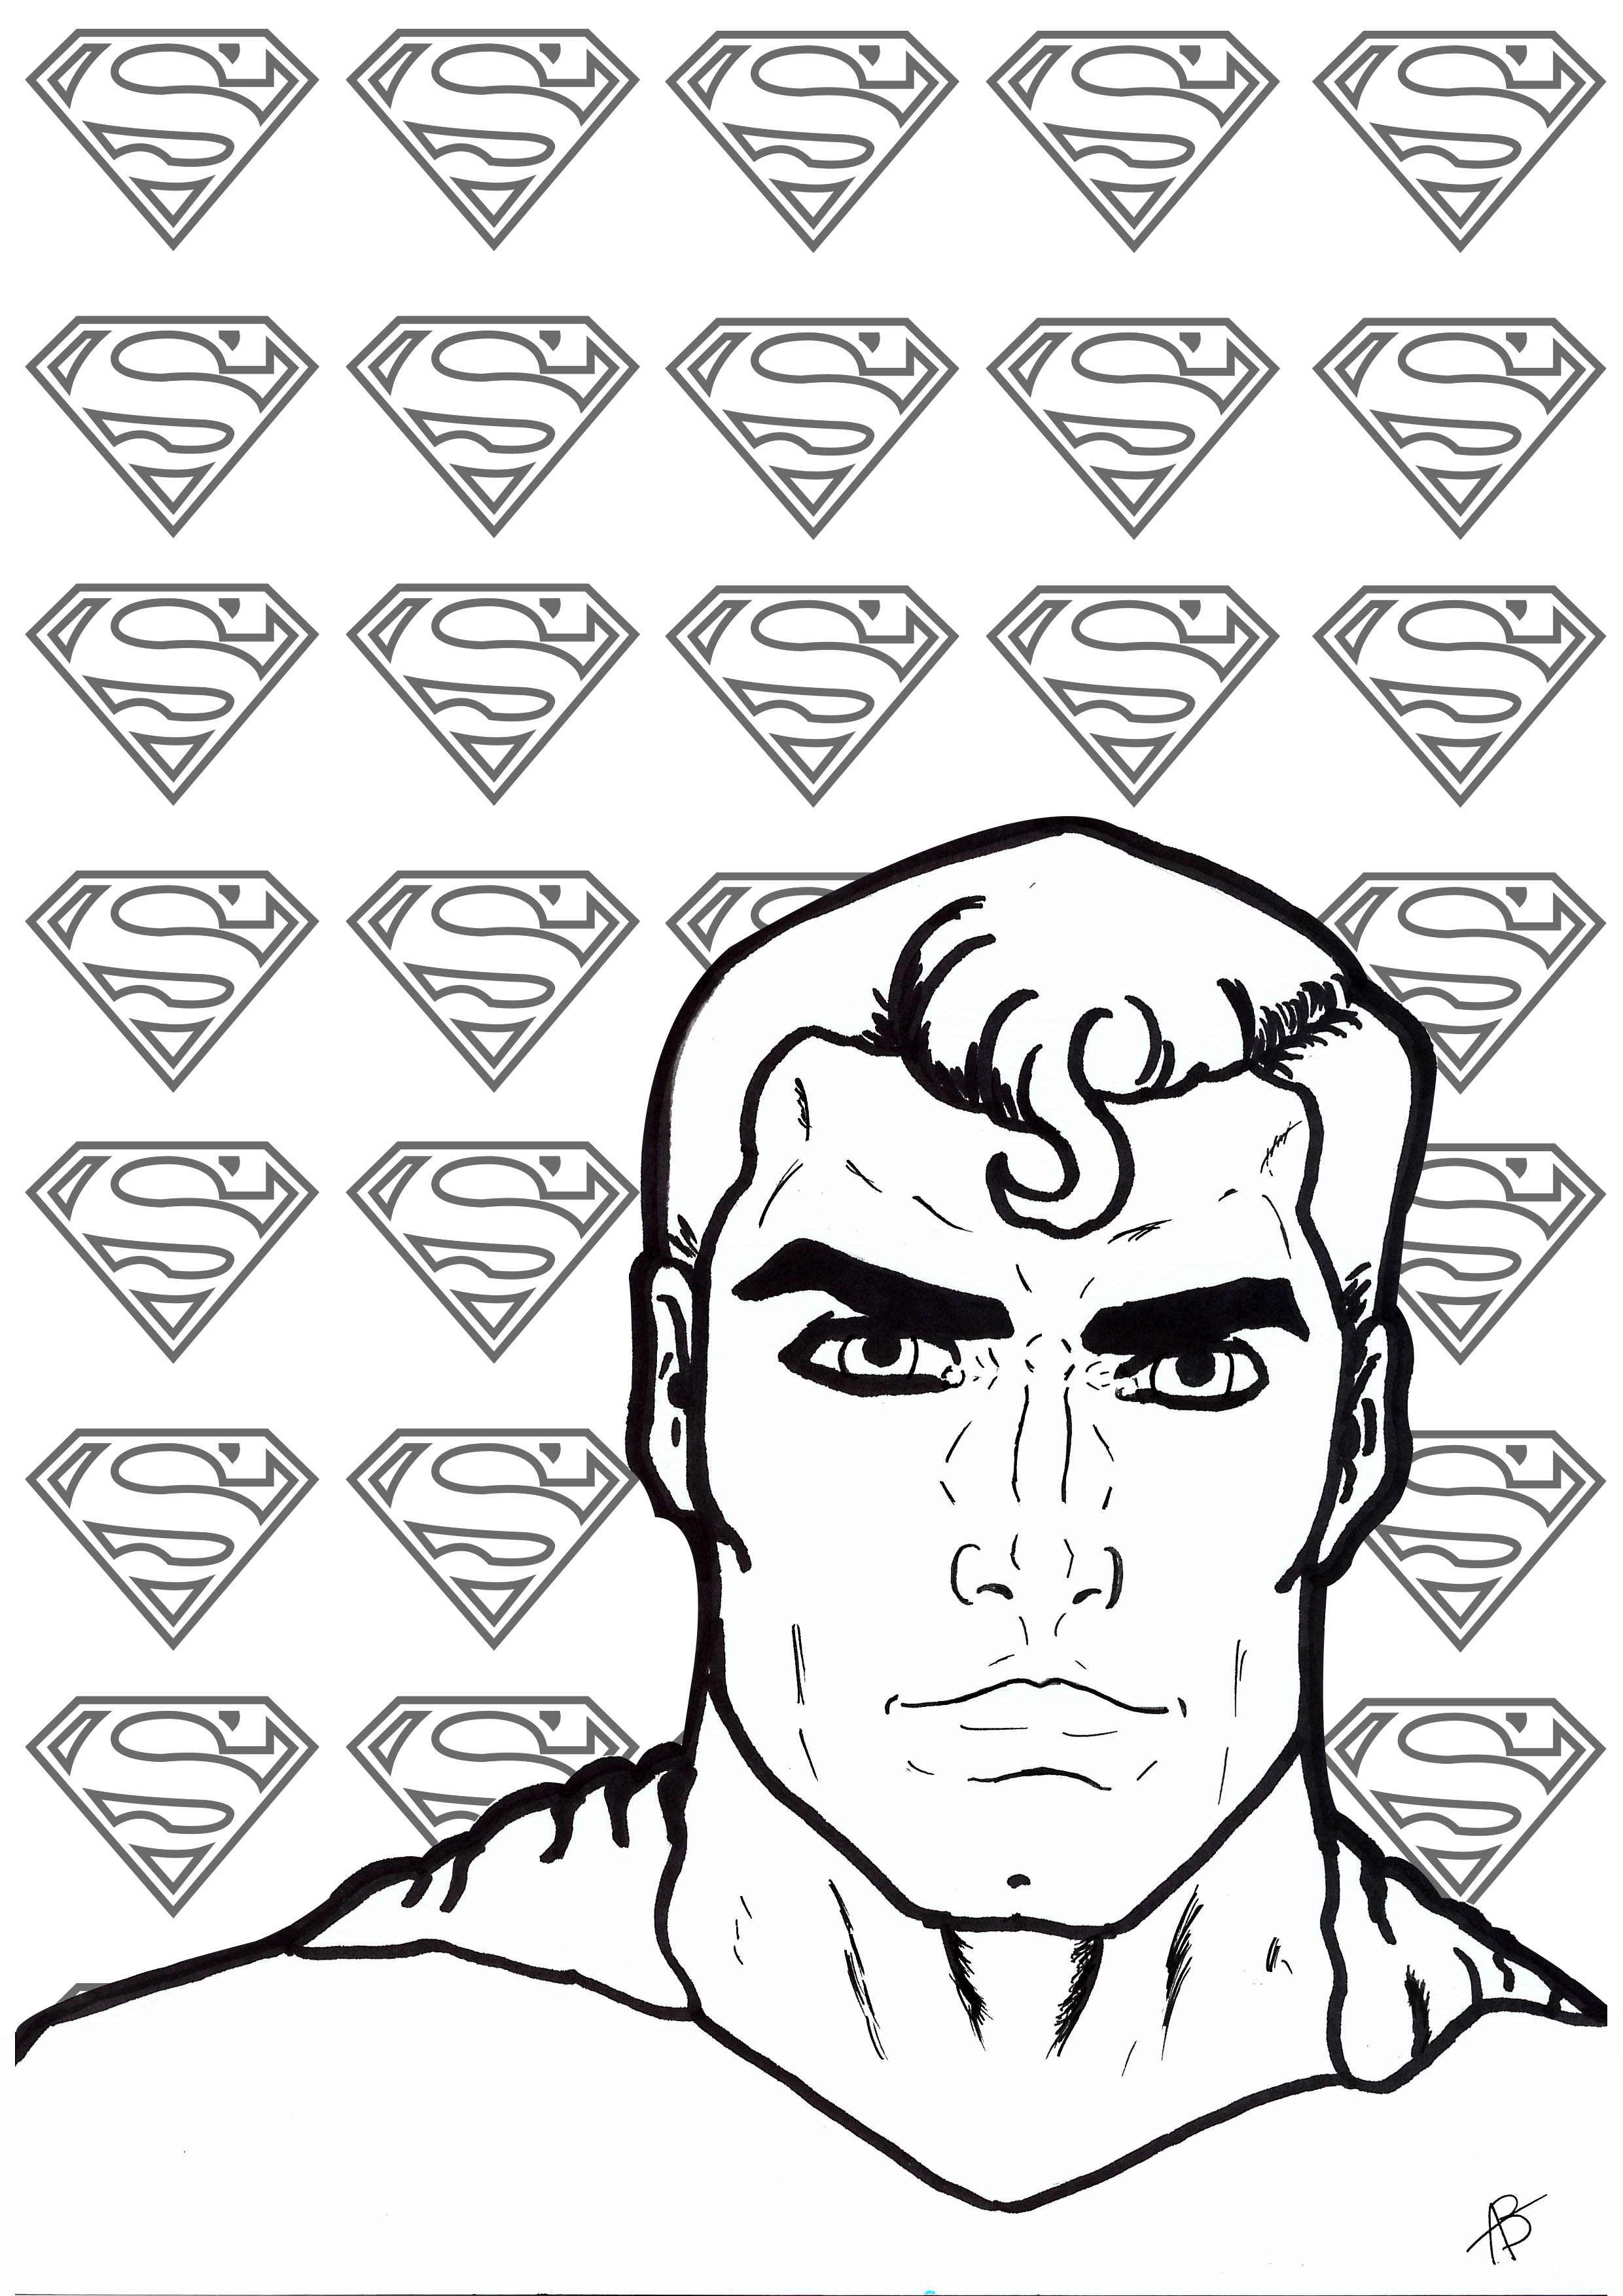 Coloring inspired by the superhero Superman